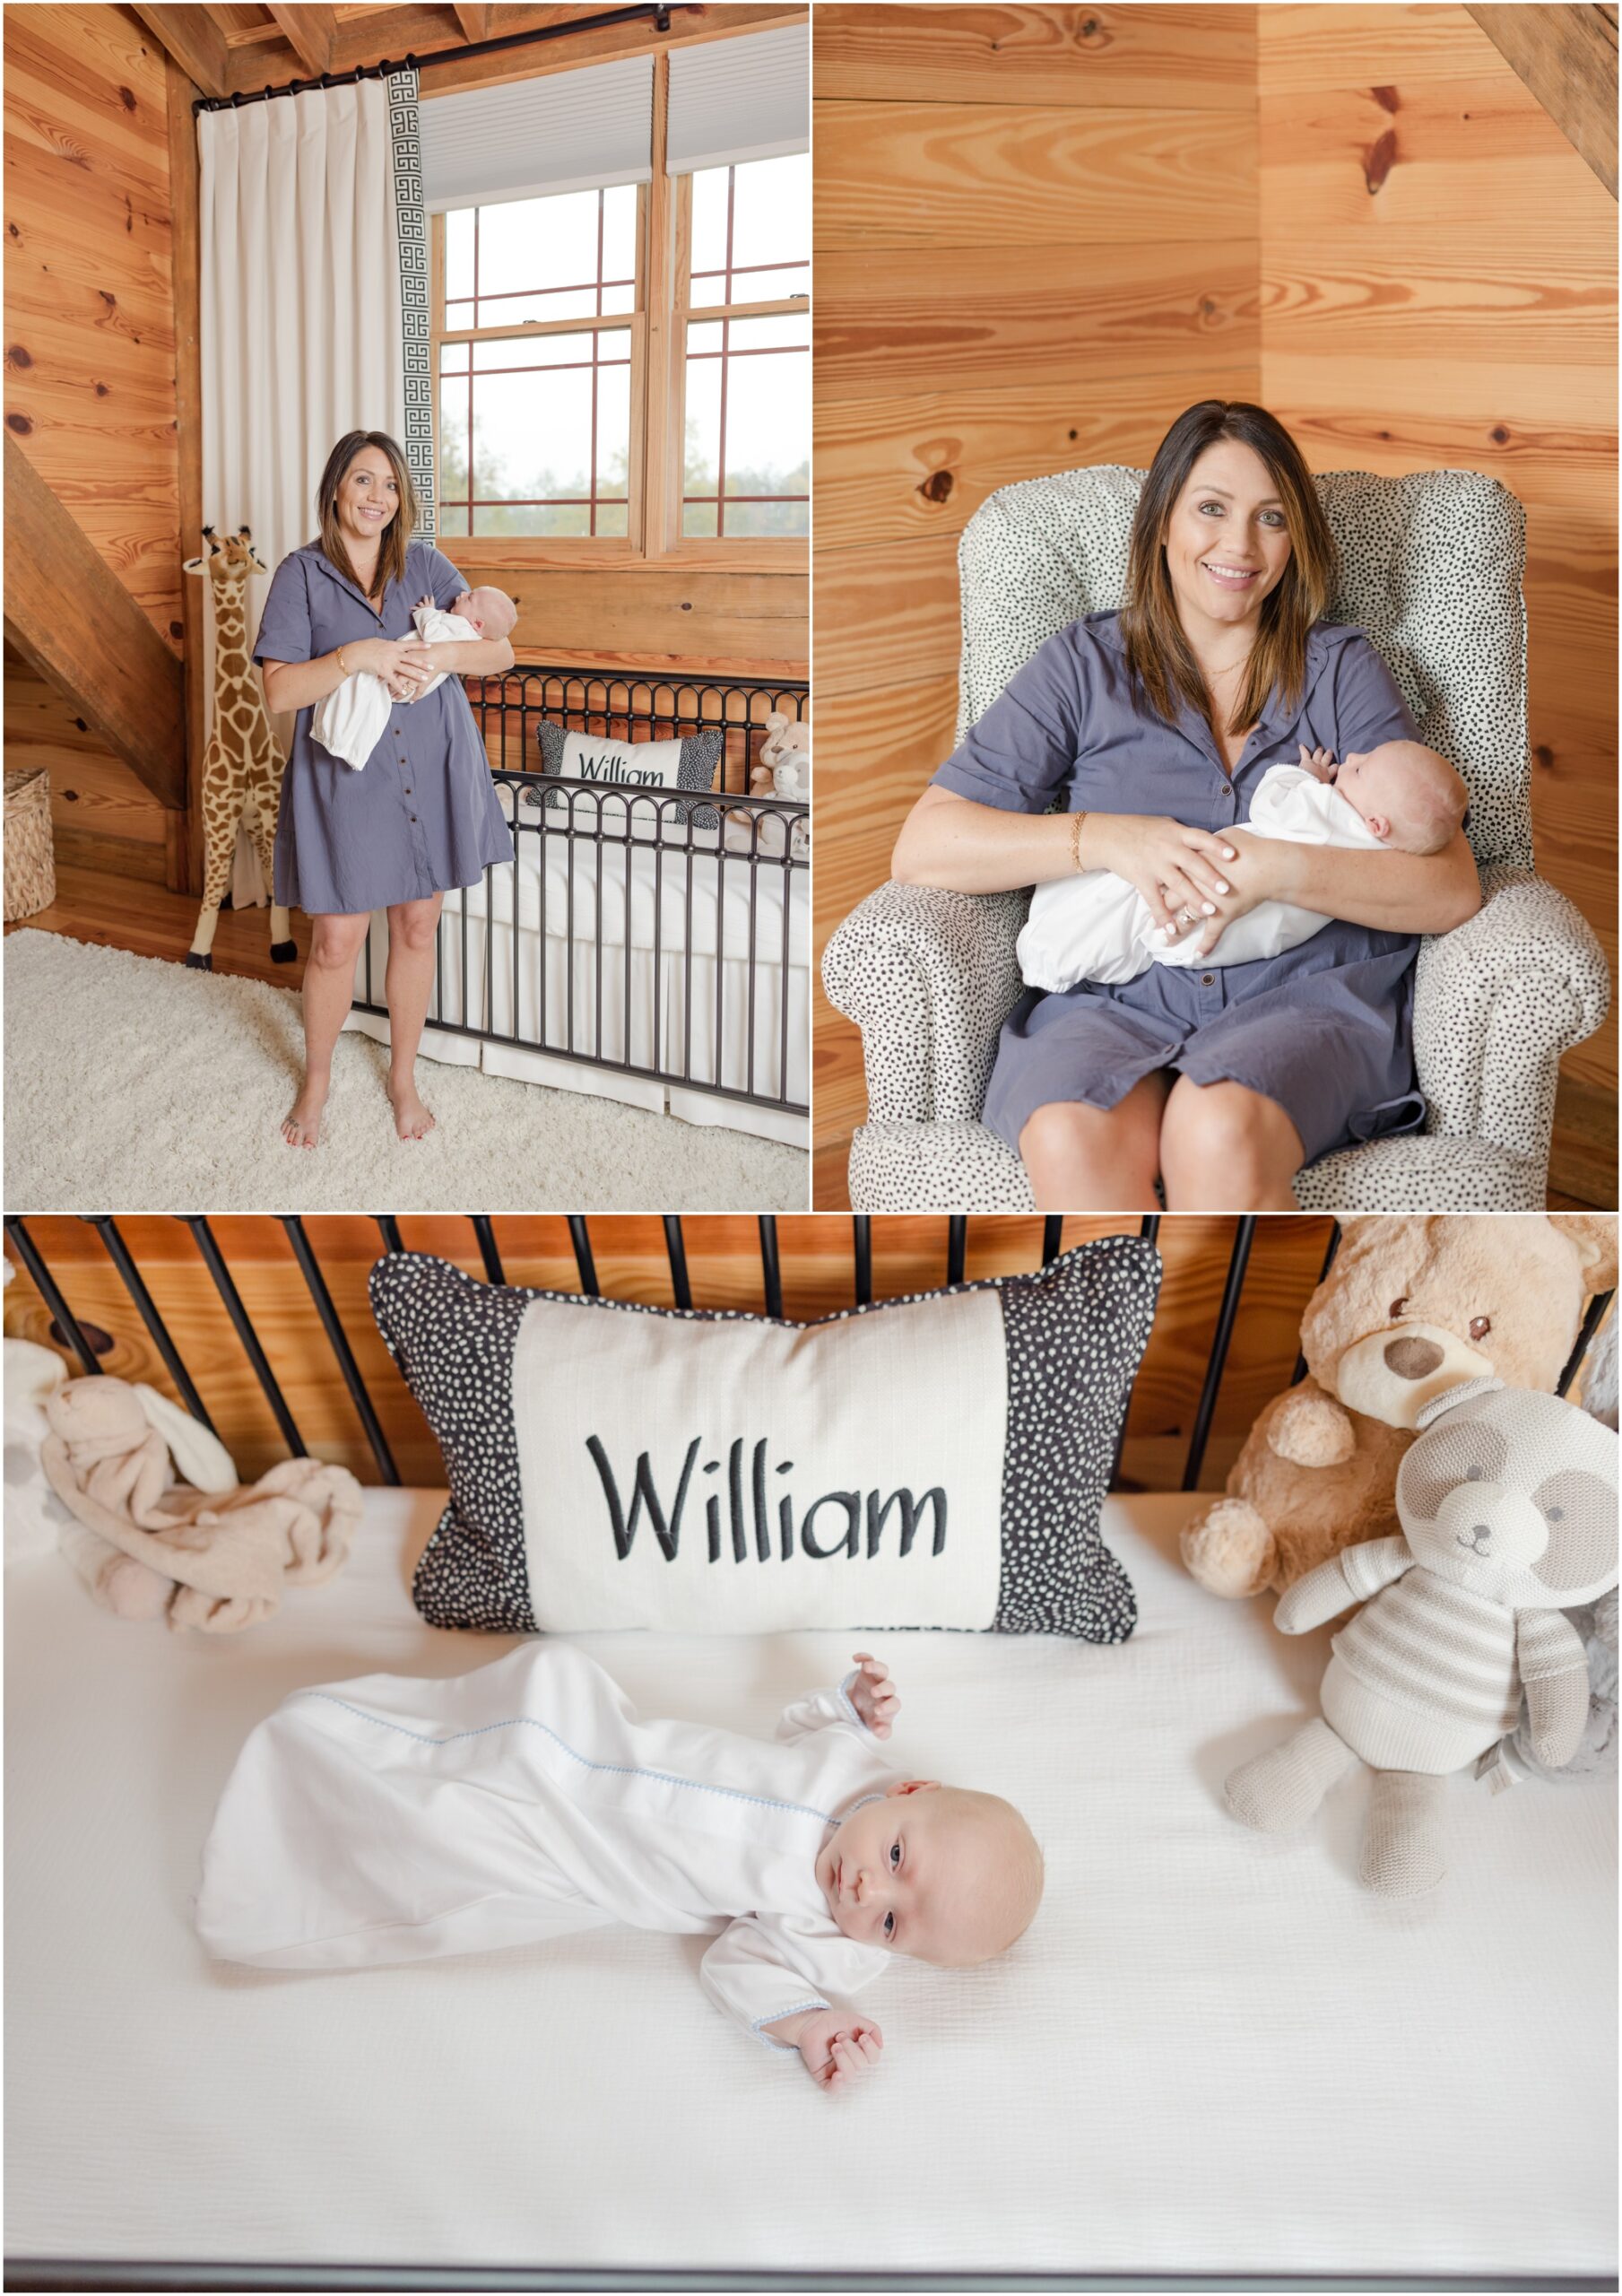 Portraits of a newborn baby boy with his parents and brother in a black and white cabin nursery during a Greenville SC newborn photography session.